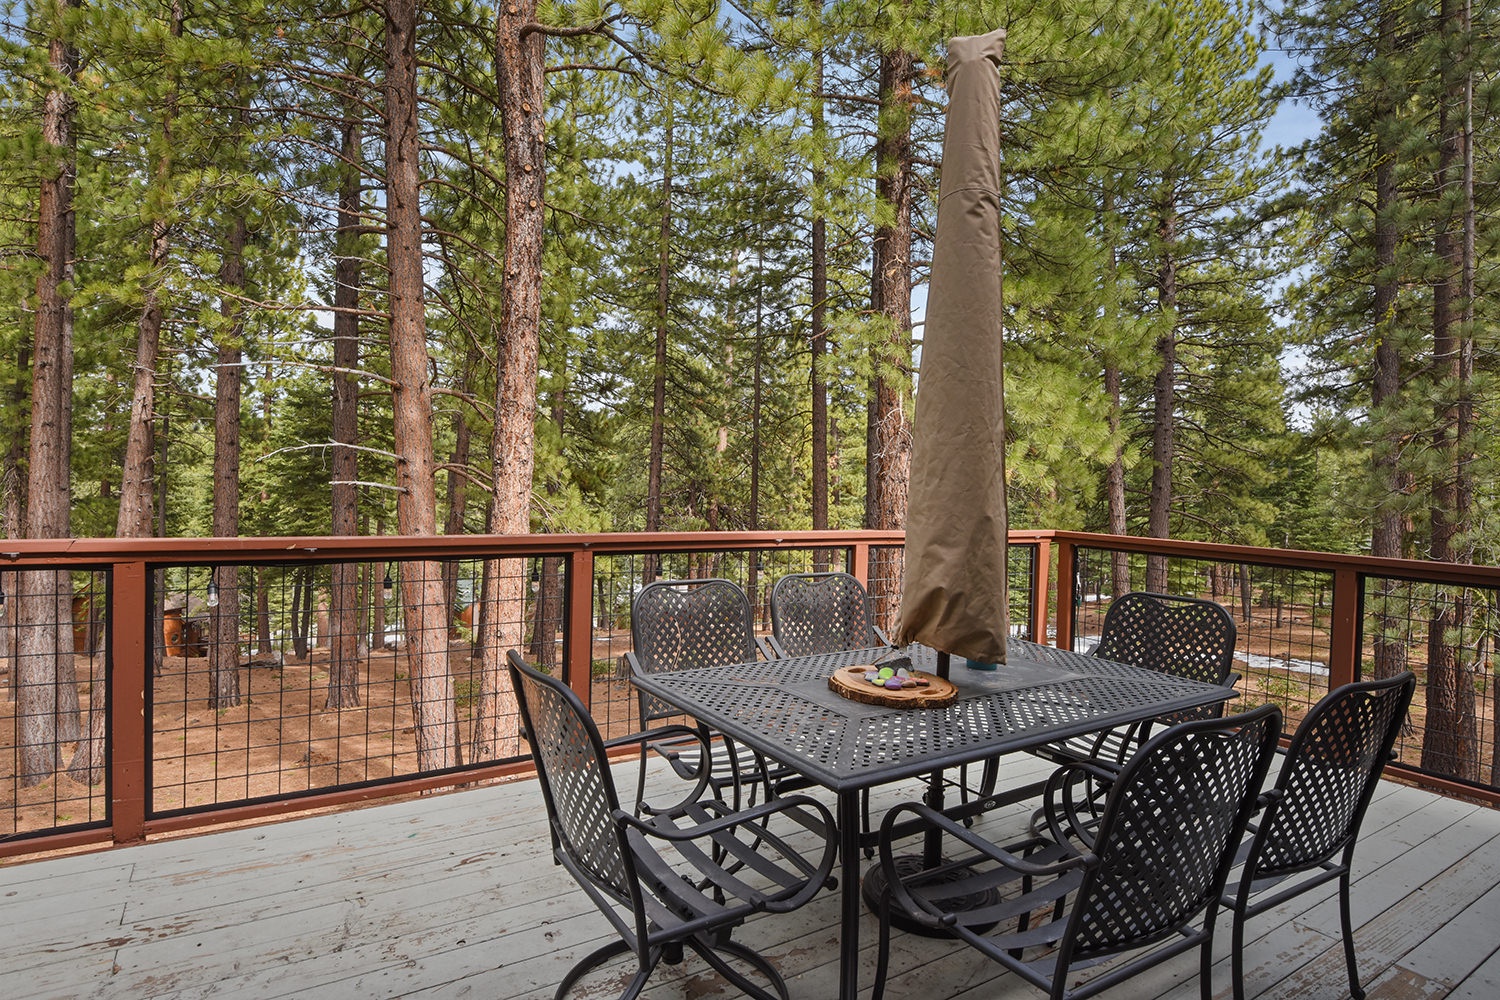 Back deck with BBQ, and outdoor seating